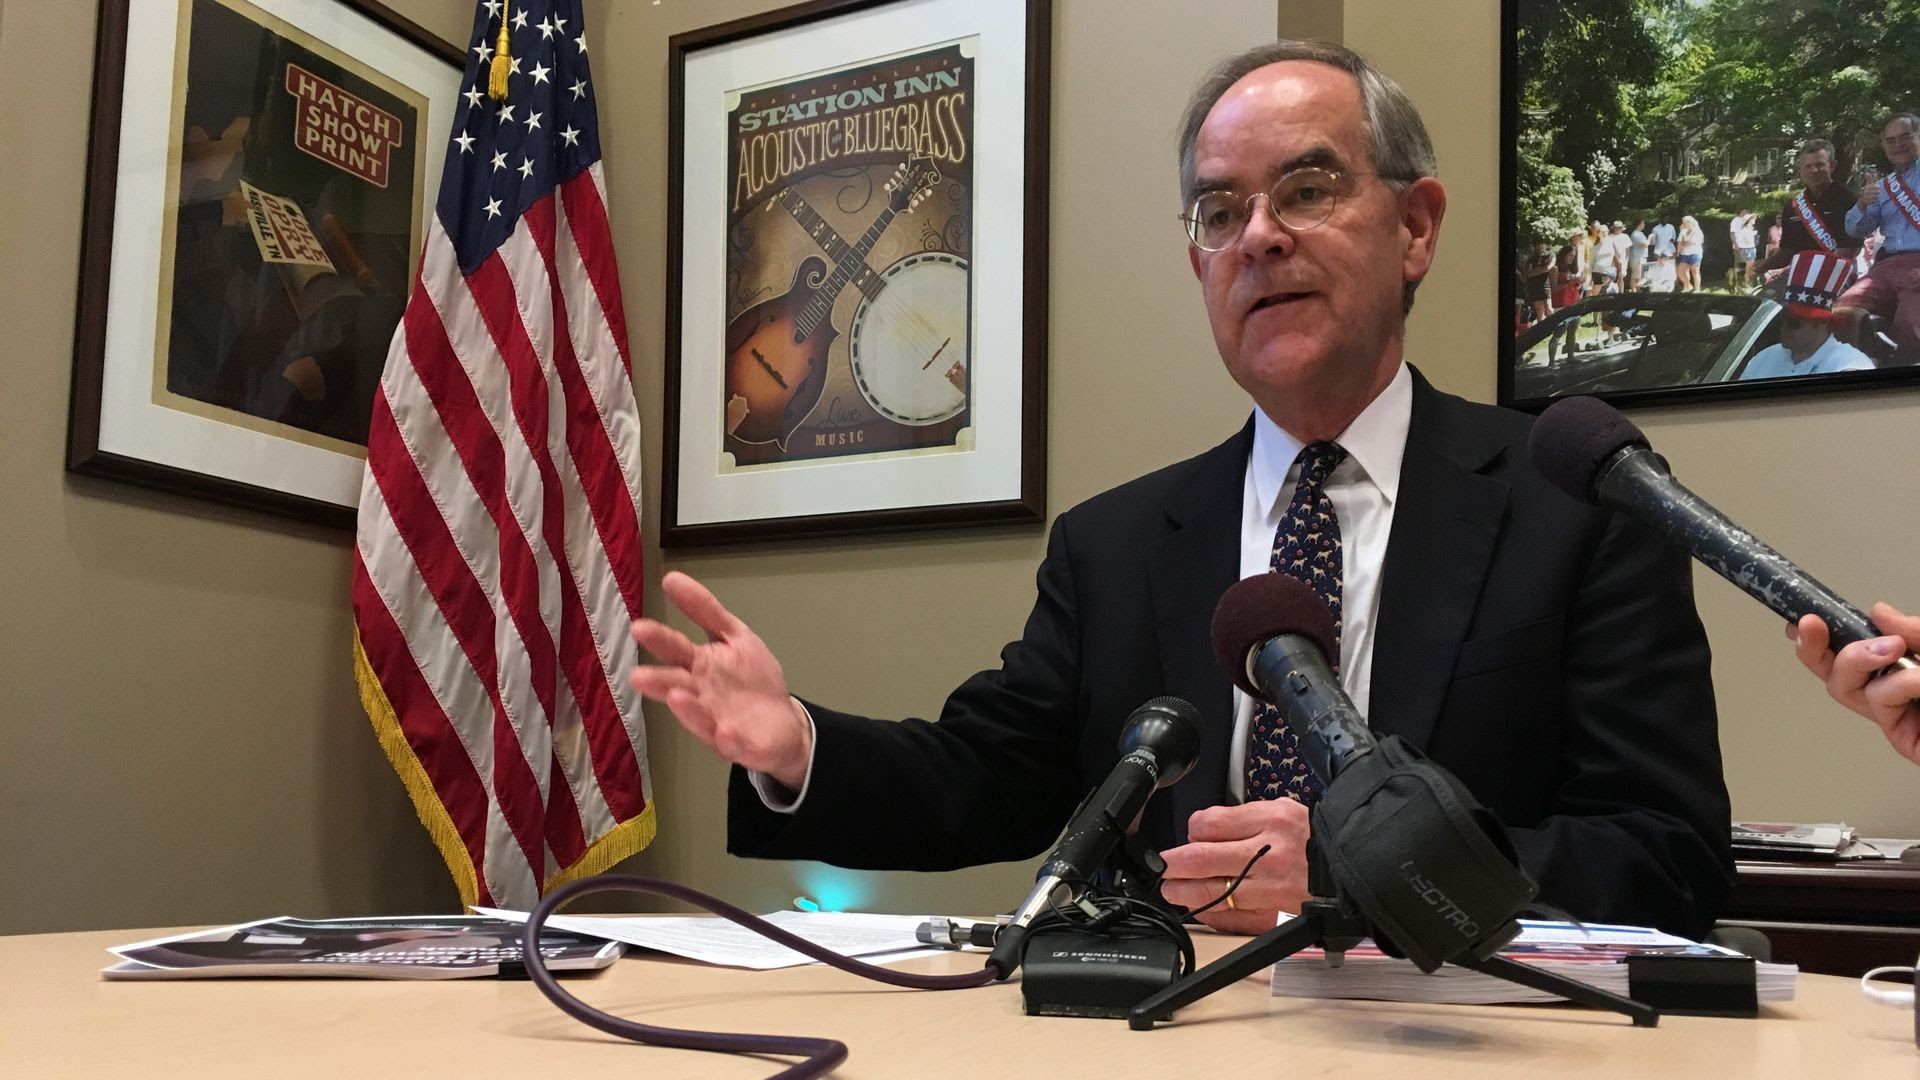 U.S. Rep. Jim Cooper, D-Nashville, sits at a desk explaining something with a hand in the air.